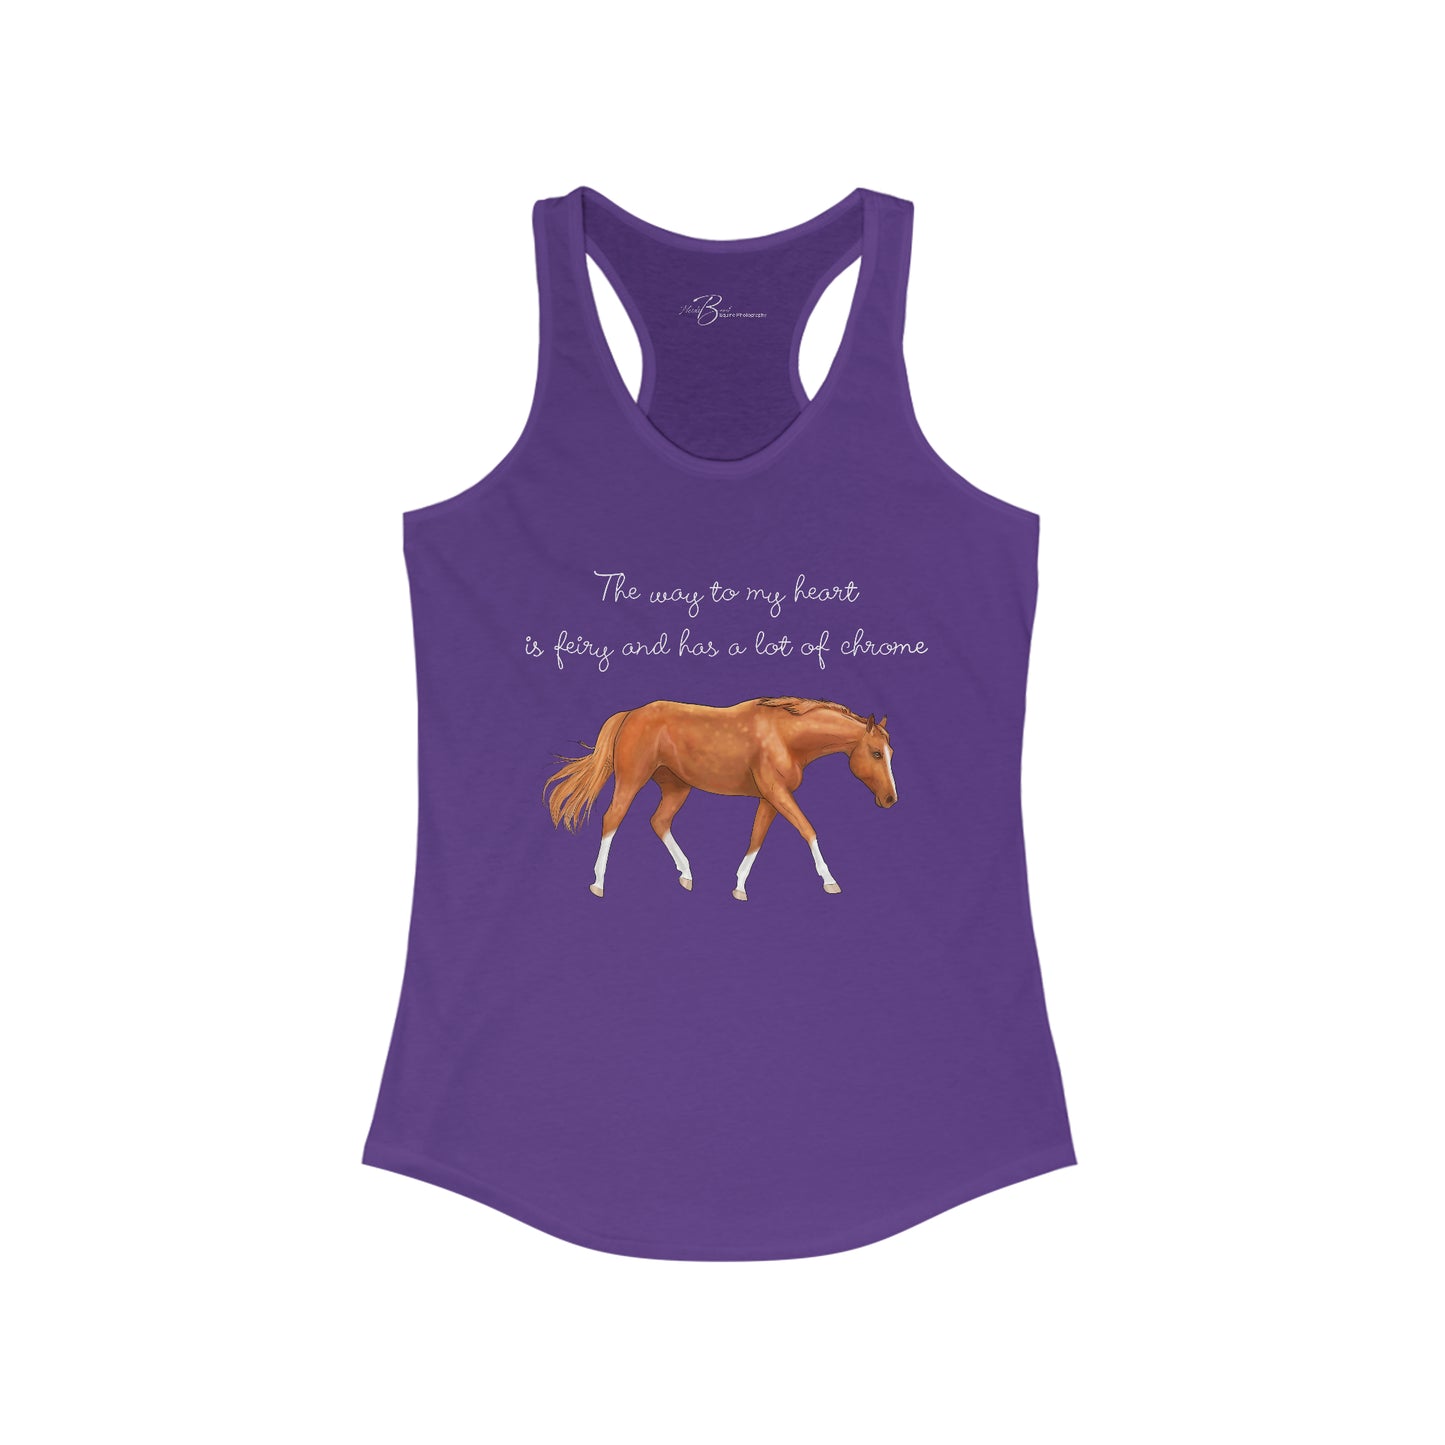 The Way To My Heart - Chestnut - Women's Ideal Racerback Tank